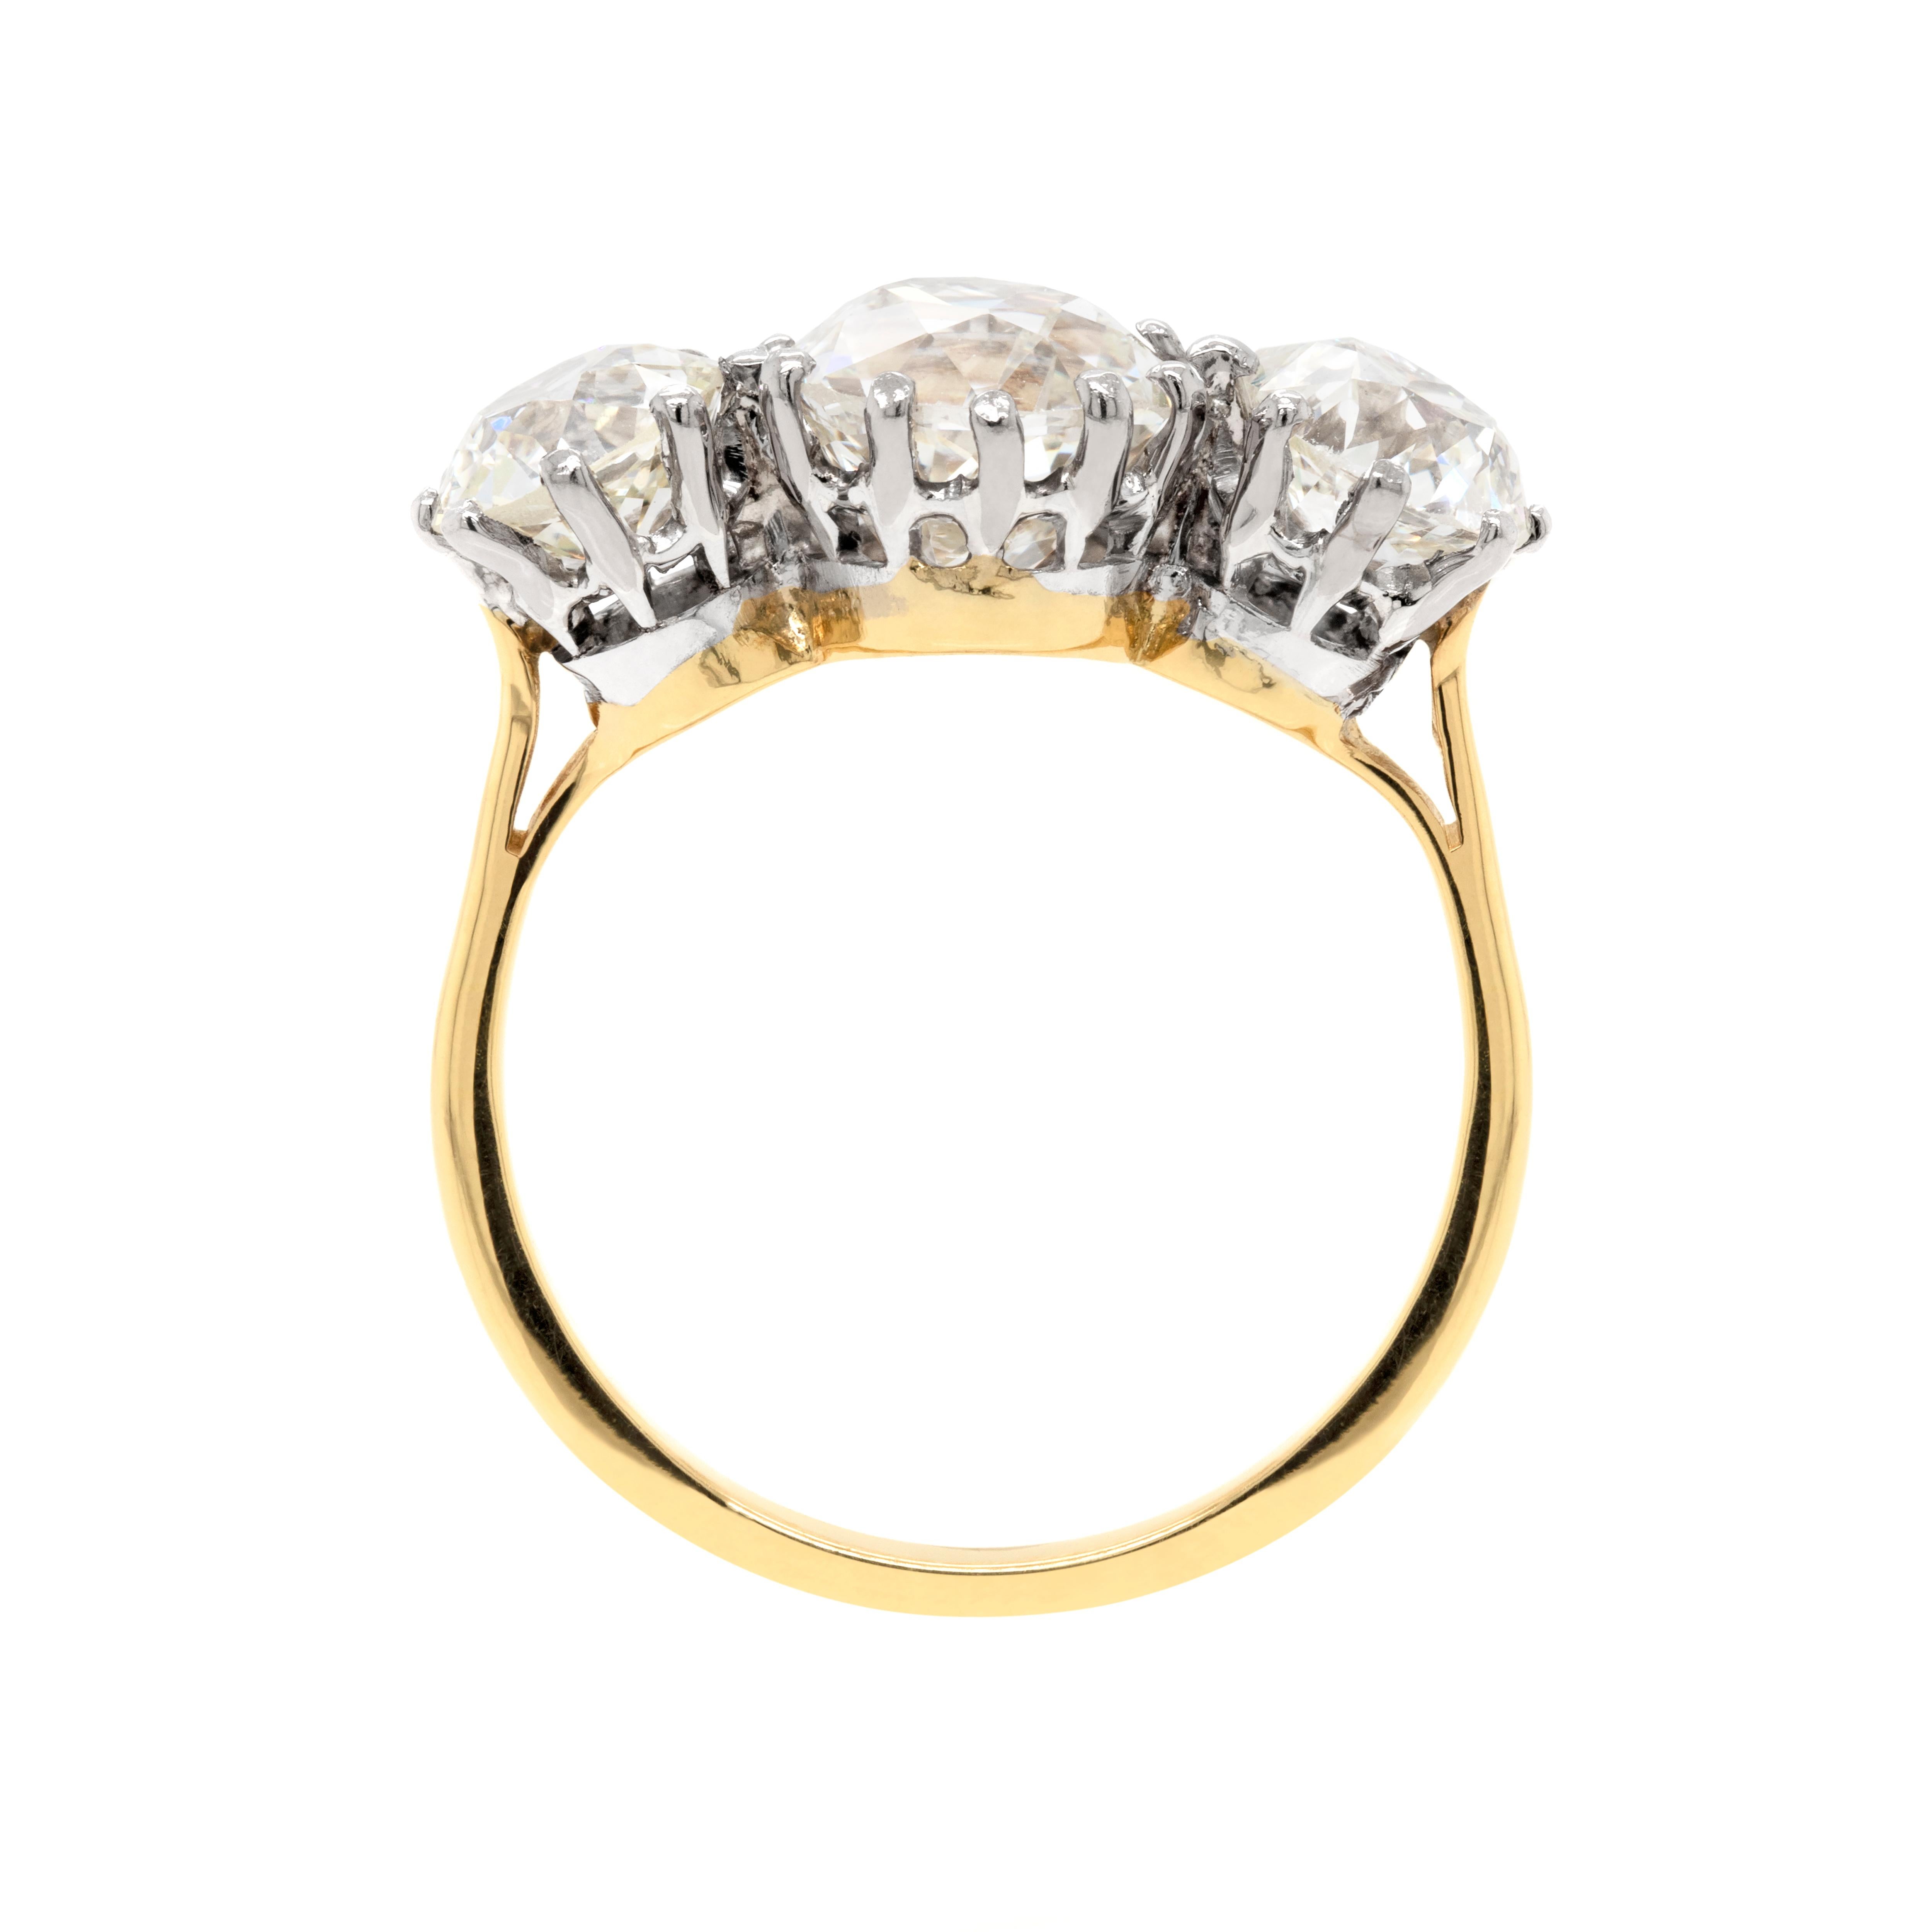 This exquisite 1920's three stone diamond engagement ring is timeless. The ring features a gorgeous cushion shaped Old Mine Cut diamond in the centre which weighs 2.50ct and is mounted in a 12 claw open back setting. The centre stone is beautifully